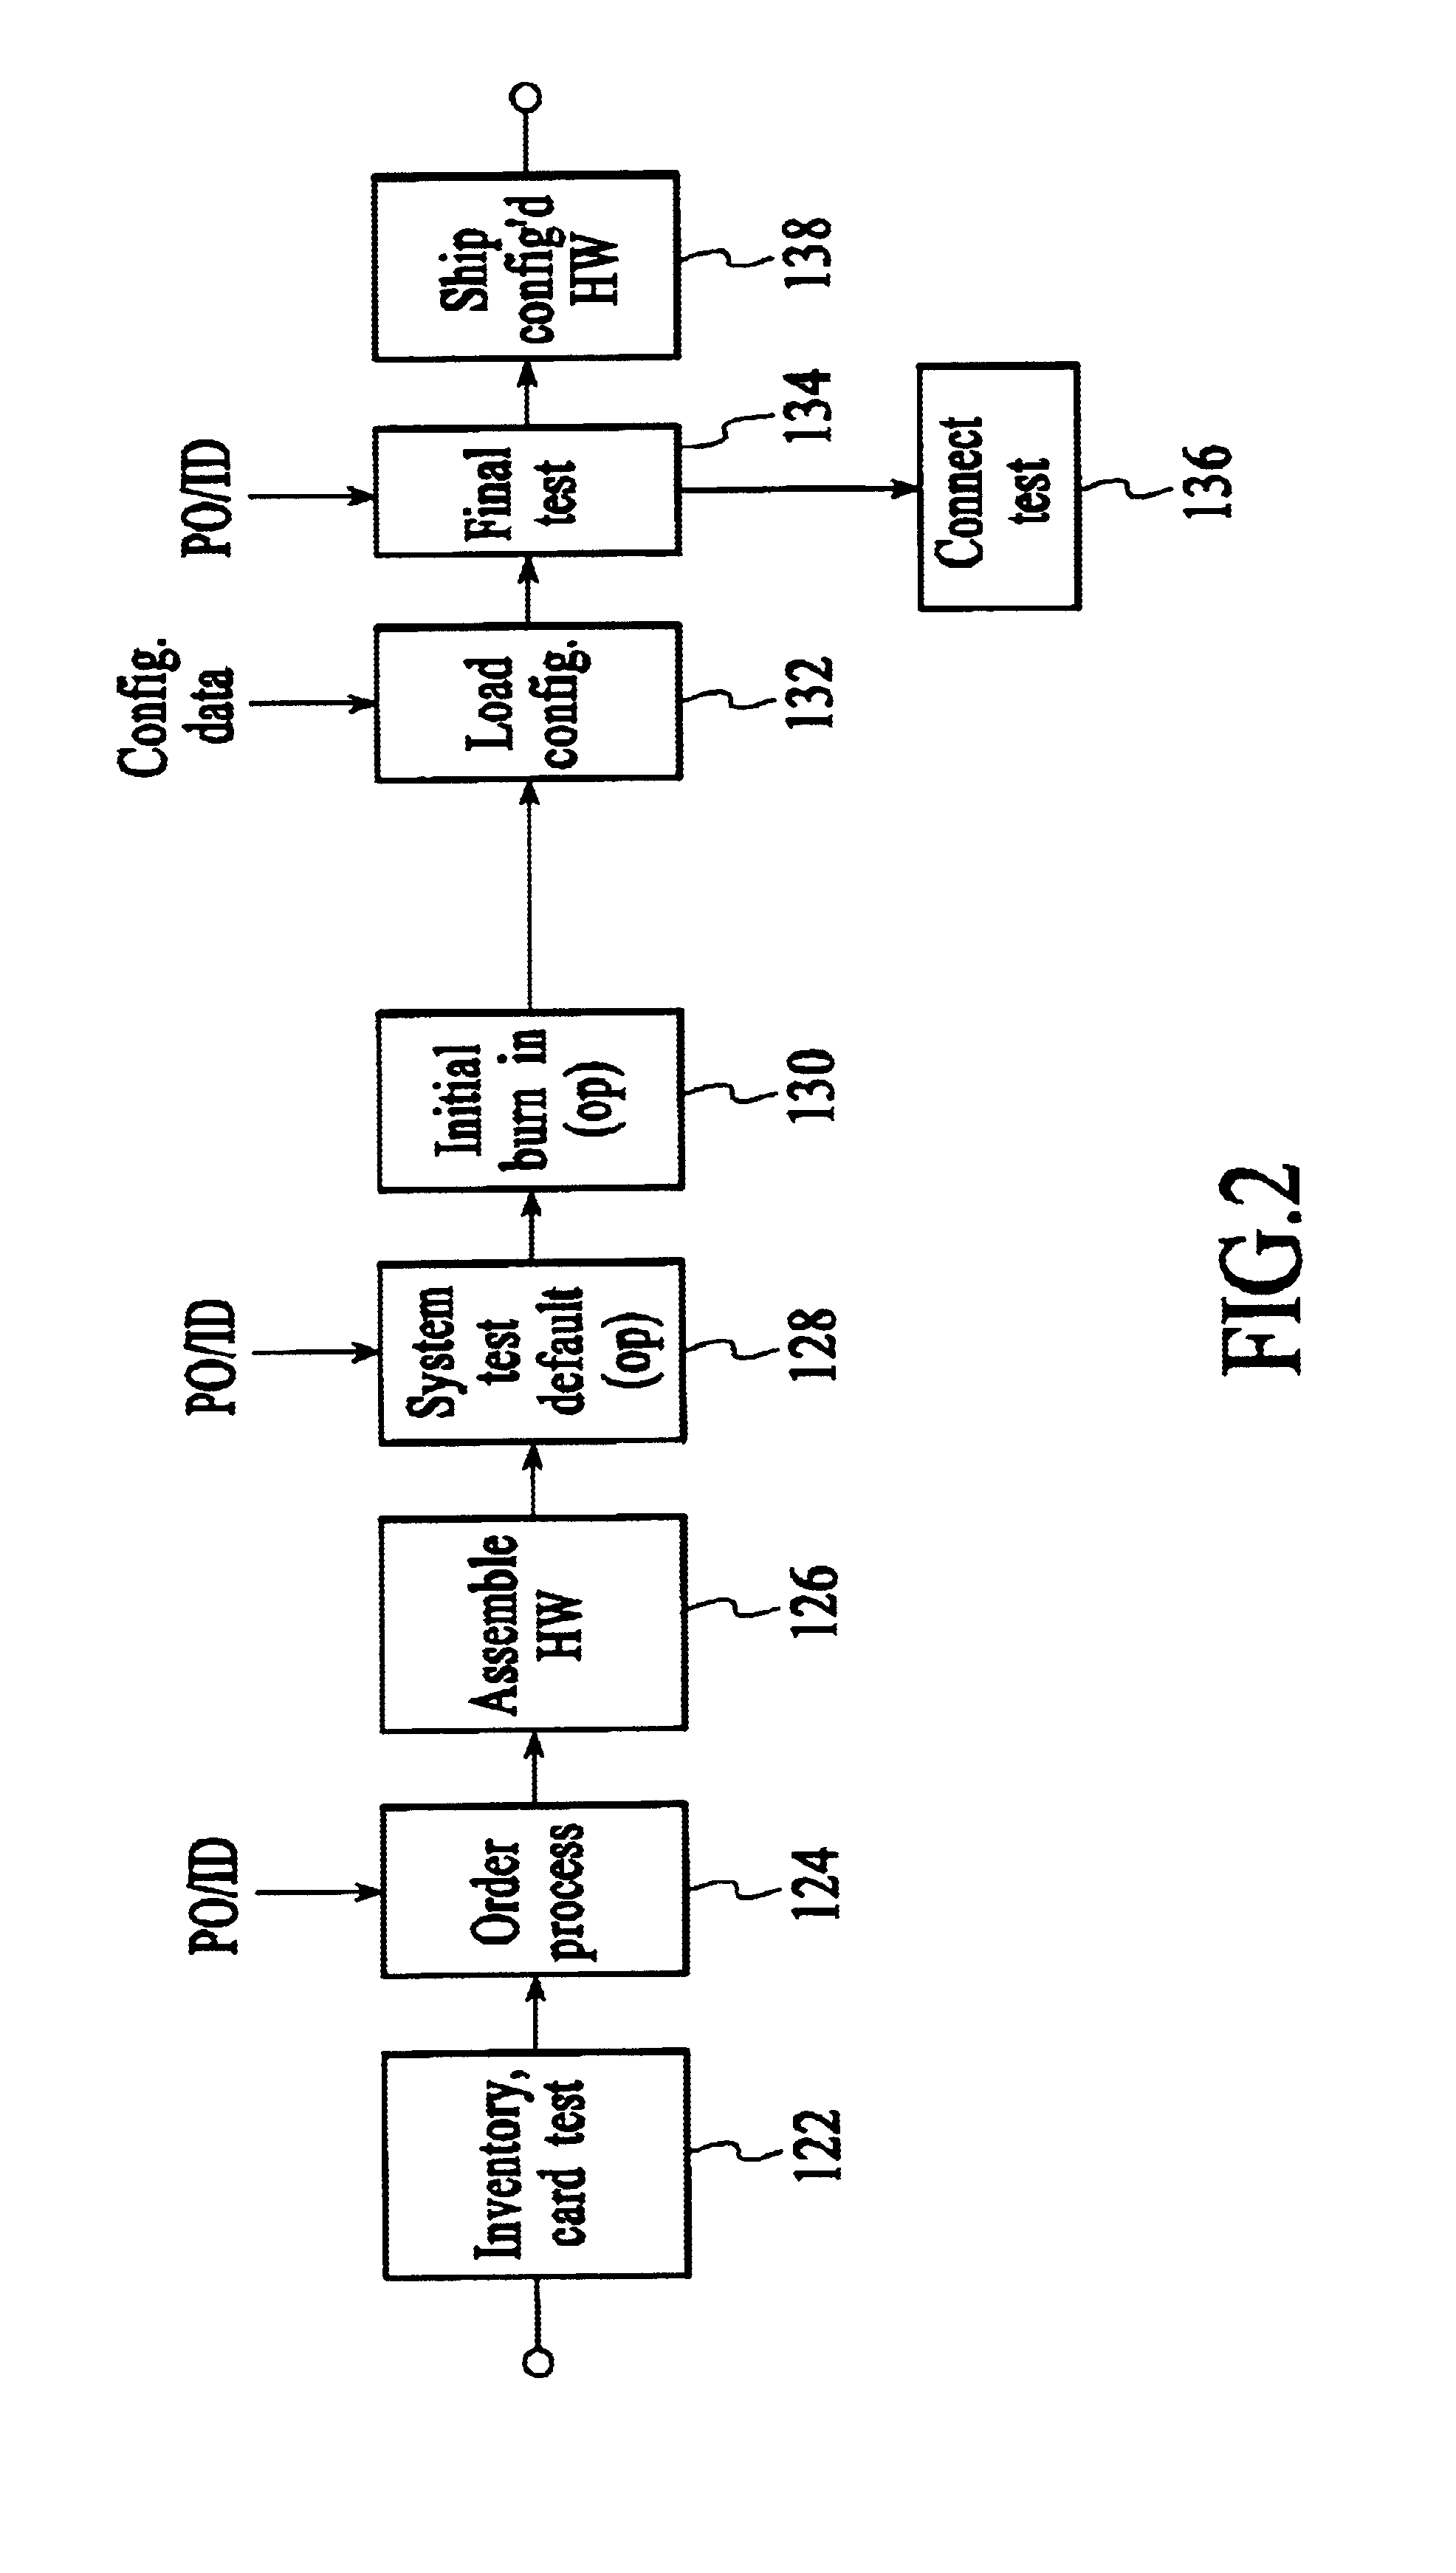 Systems and methods for providing voice/data communication systems and voice/data communications